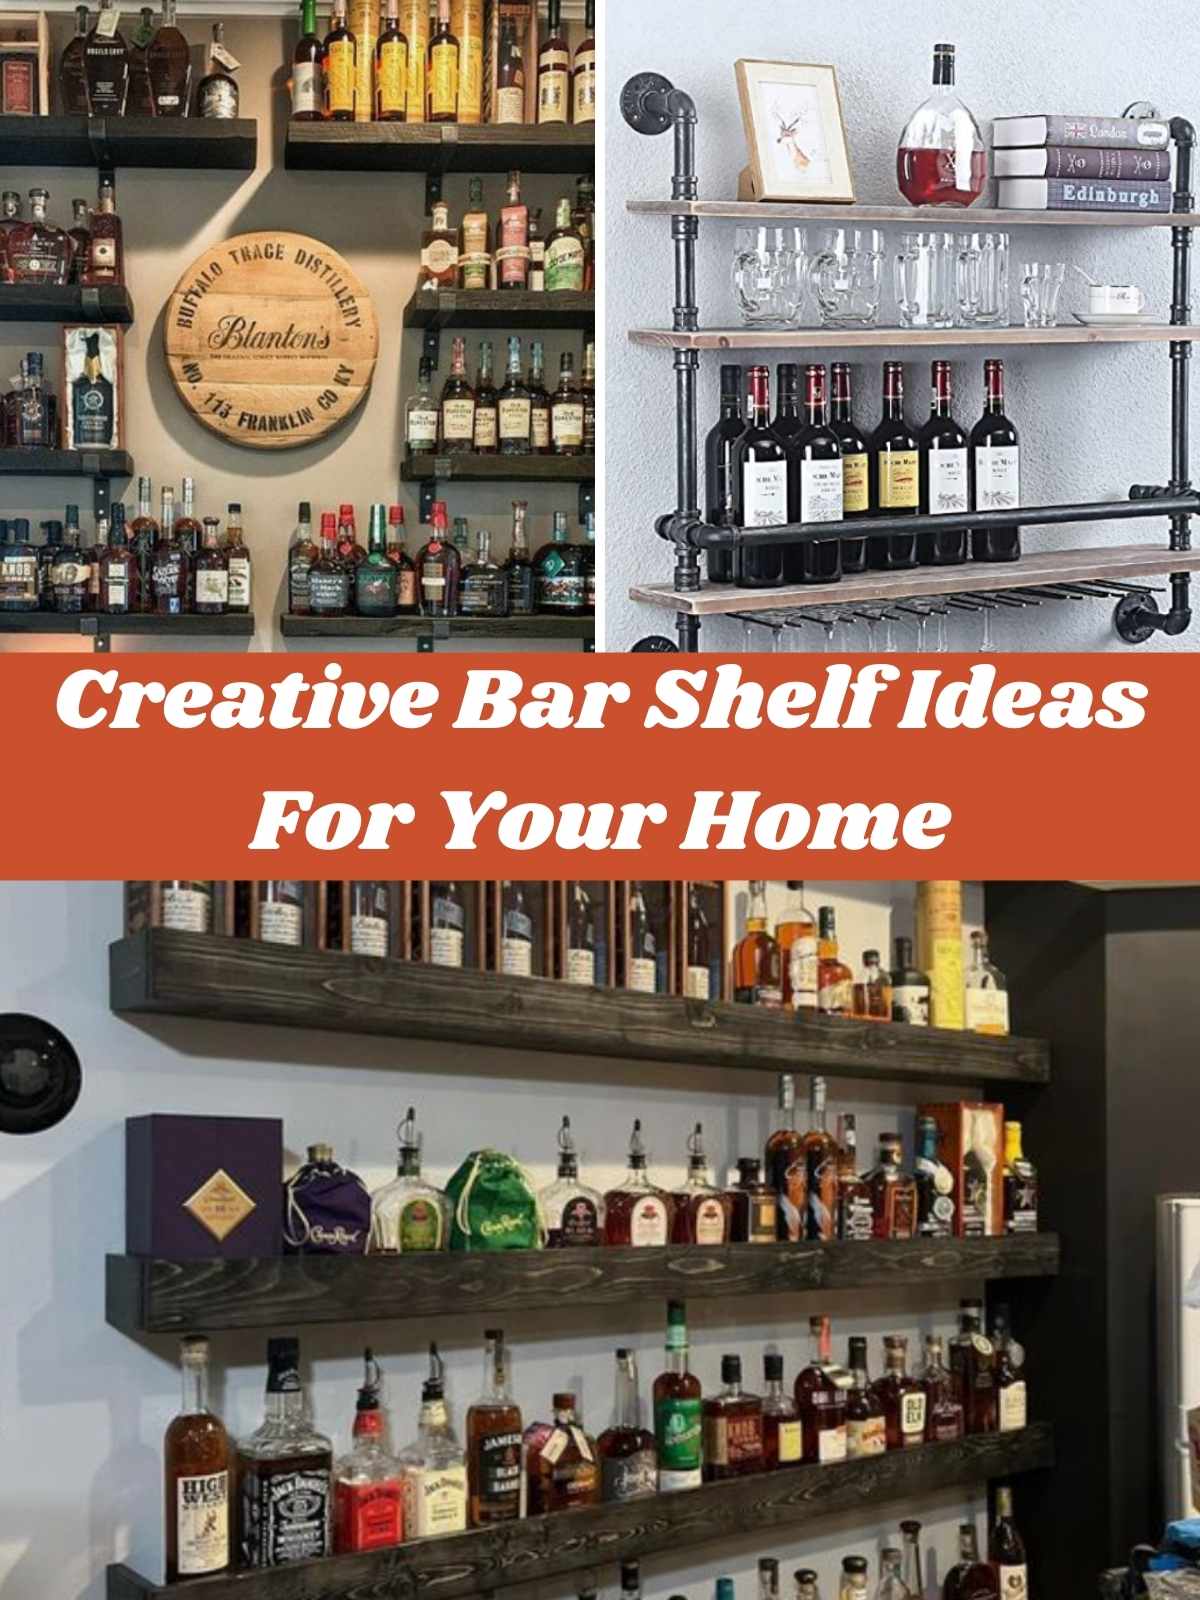 Creative Bar Shelf Ideas For Your Home. 3 examples of booze filled shelves.